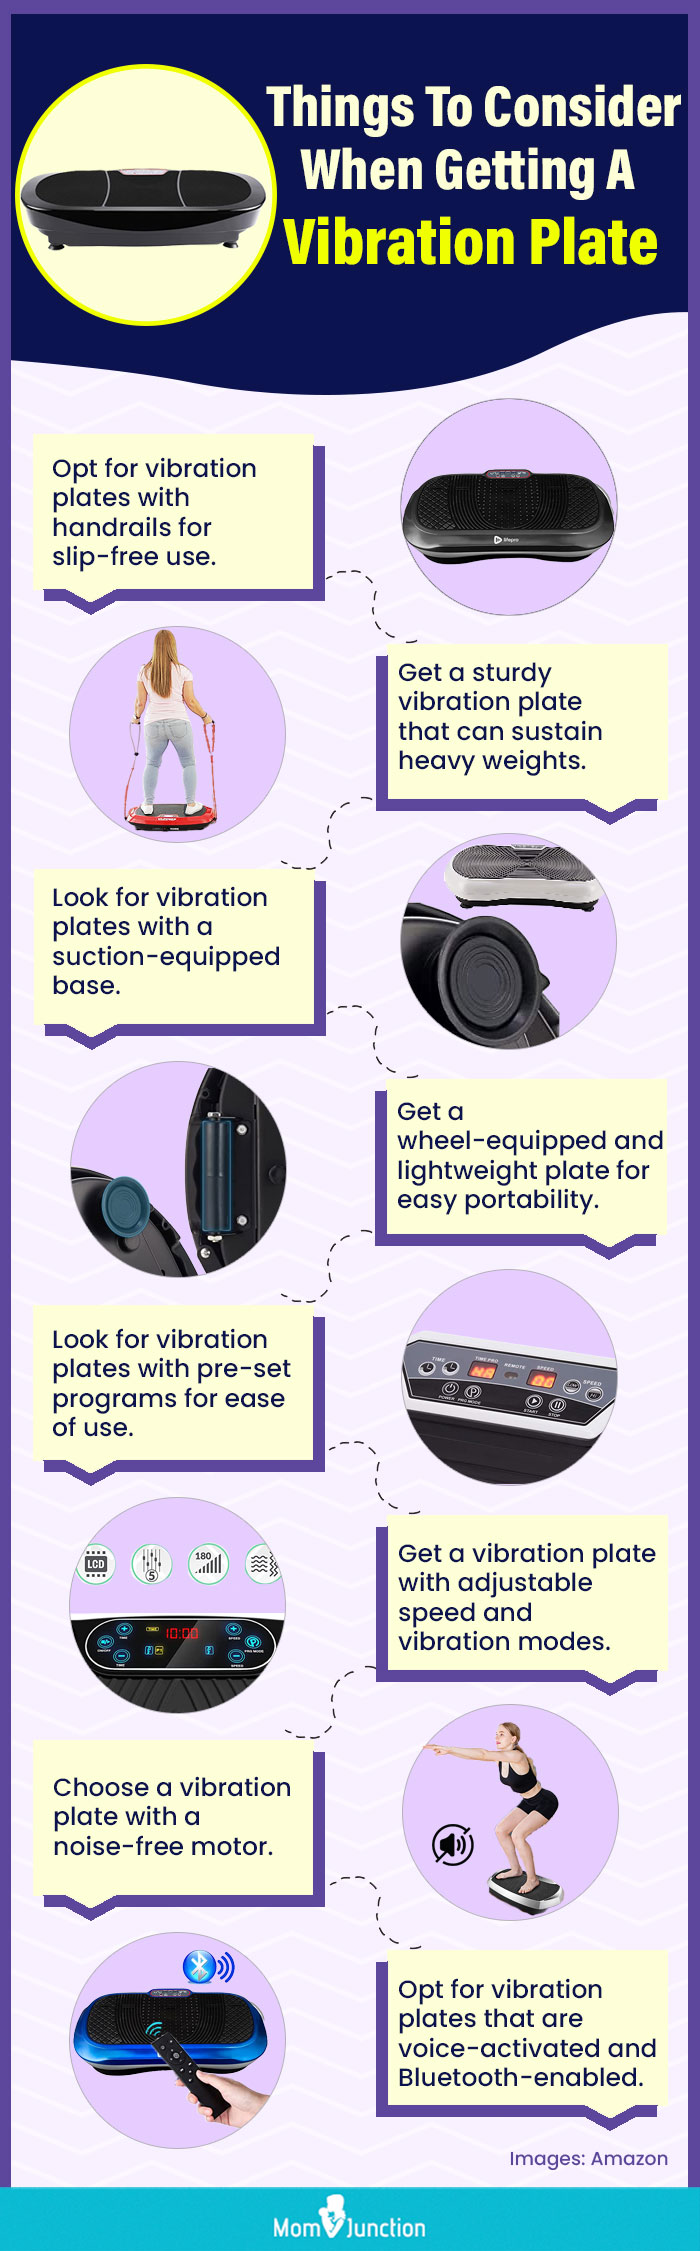 Things To Consider When Getting A Vibration Plate (infographic)